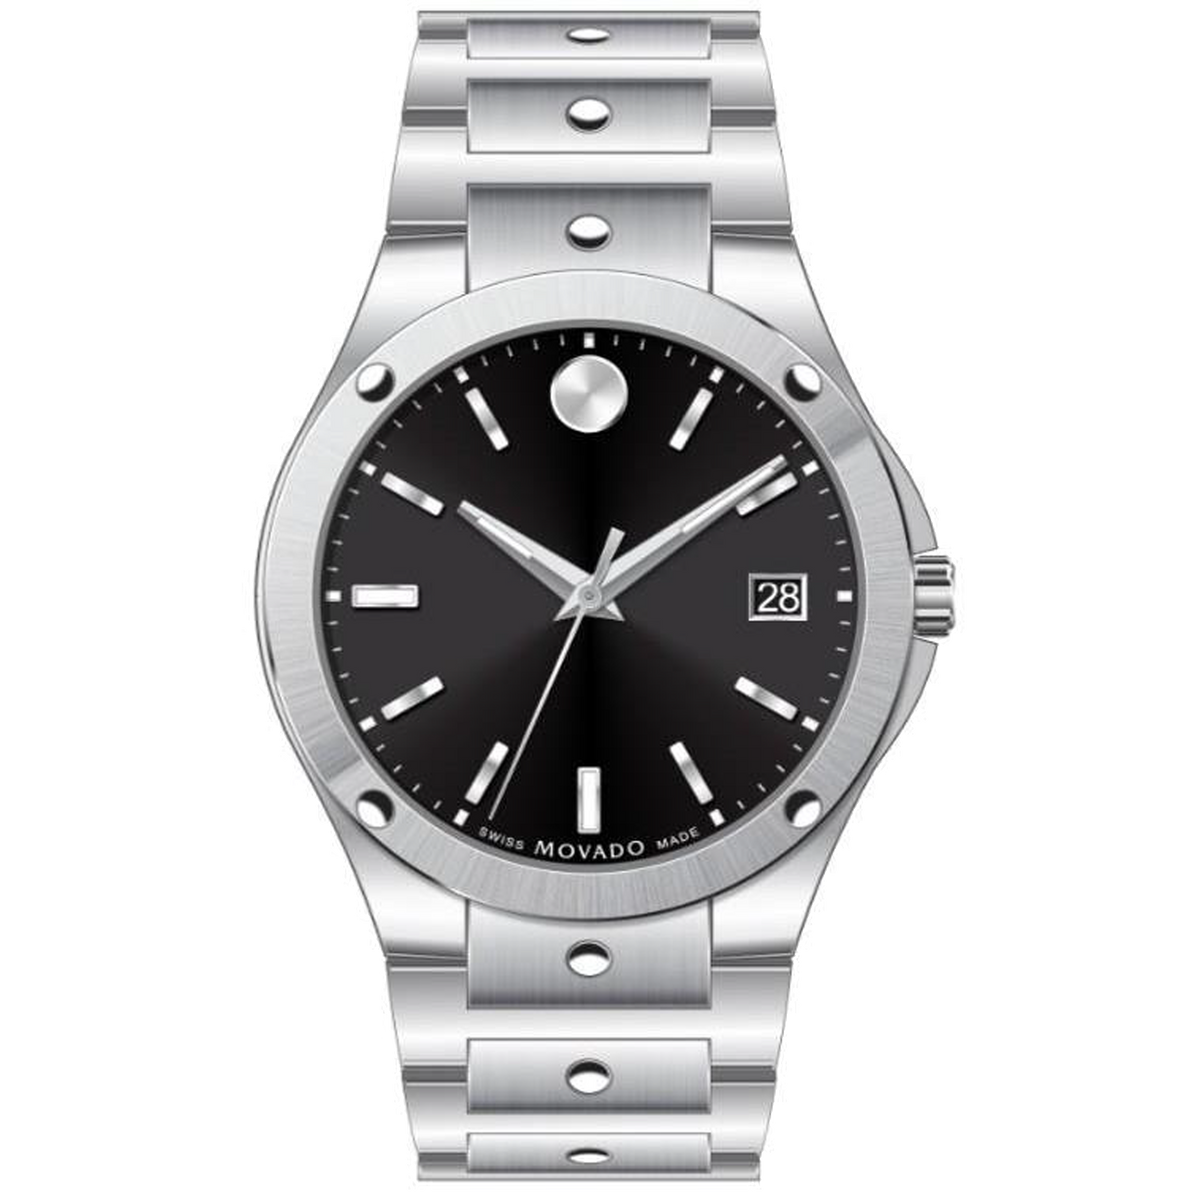 Movado Watch SE 41mm - Stainless Steel